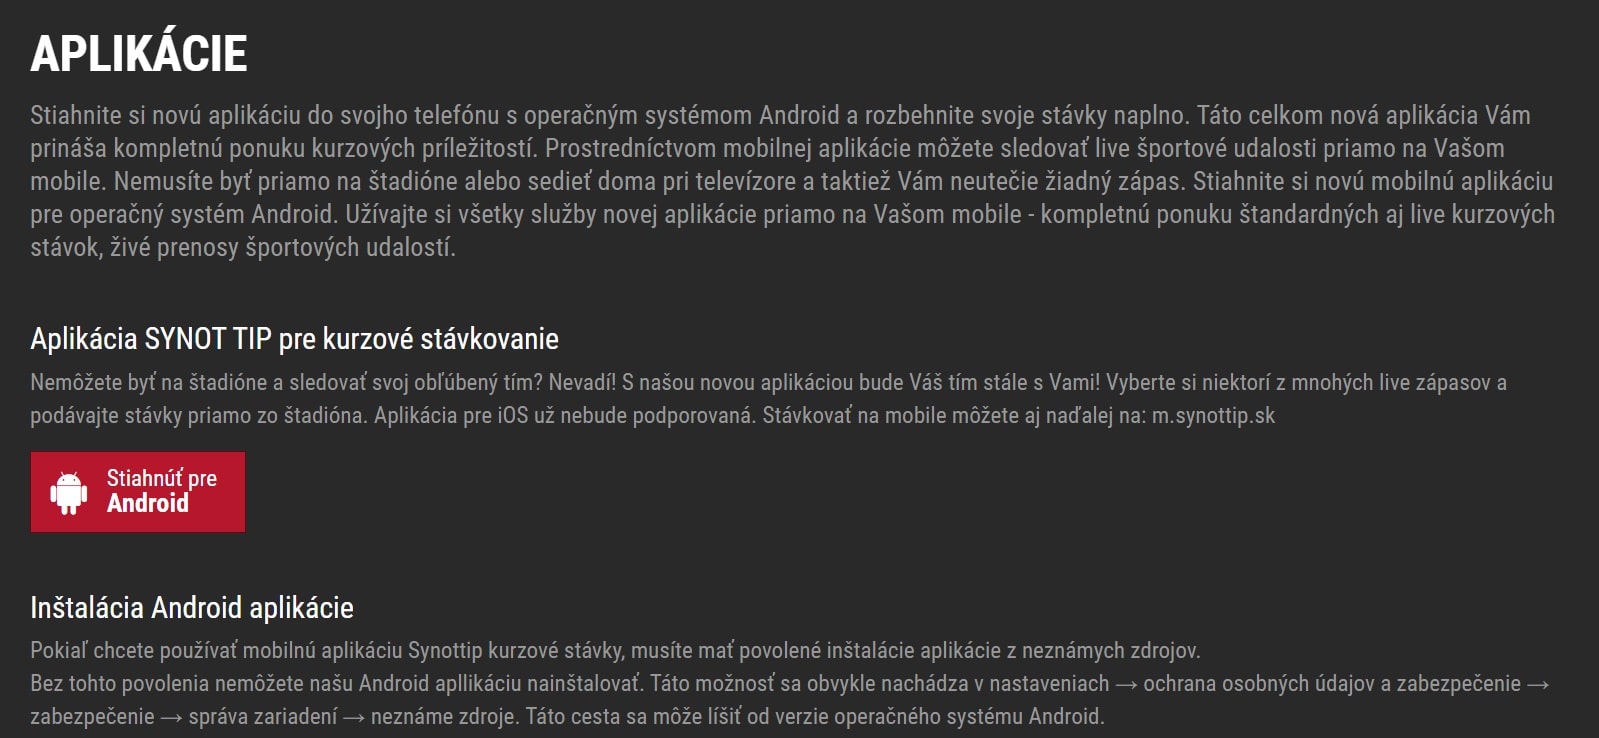 Aplikacie Synottip Android